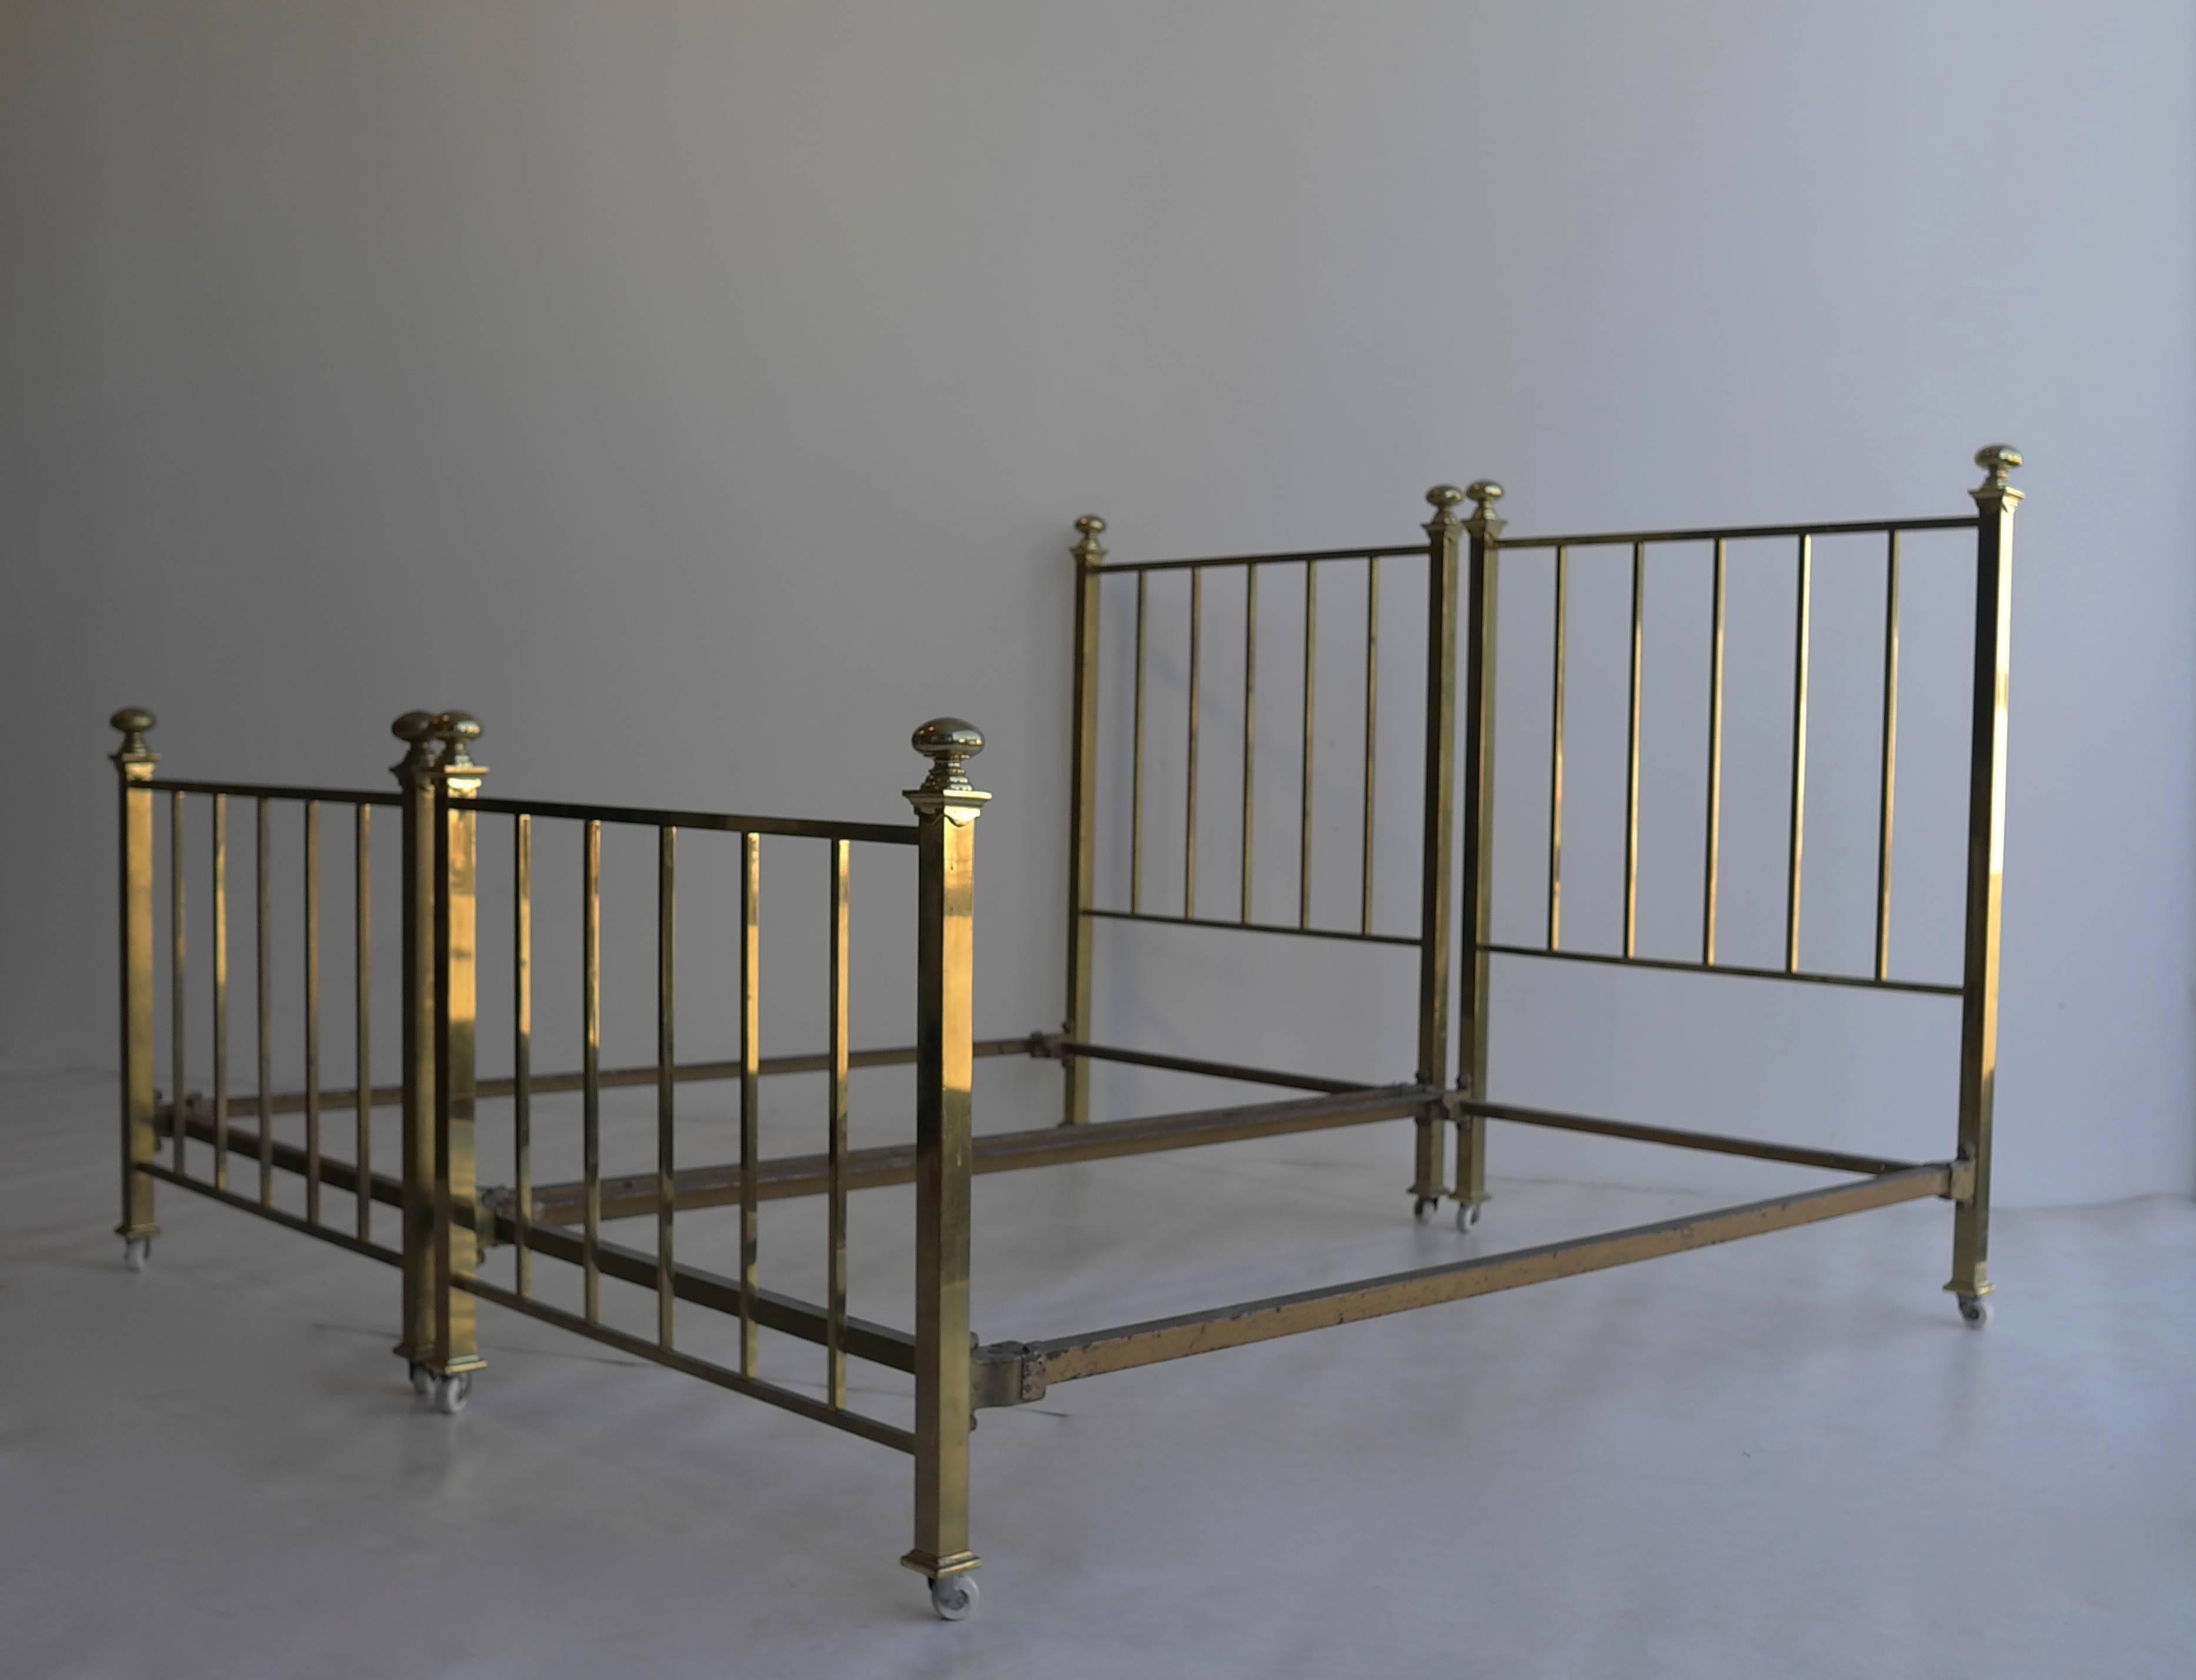 Pair of early 20th century brass beds.

Each bed is: 102 cm wide (mattress size 99 x 190), height headboard 131cm, height footboard 87cm.

Brass headboard and footboard they come with the original middle section.
The length can be easy